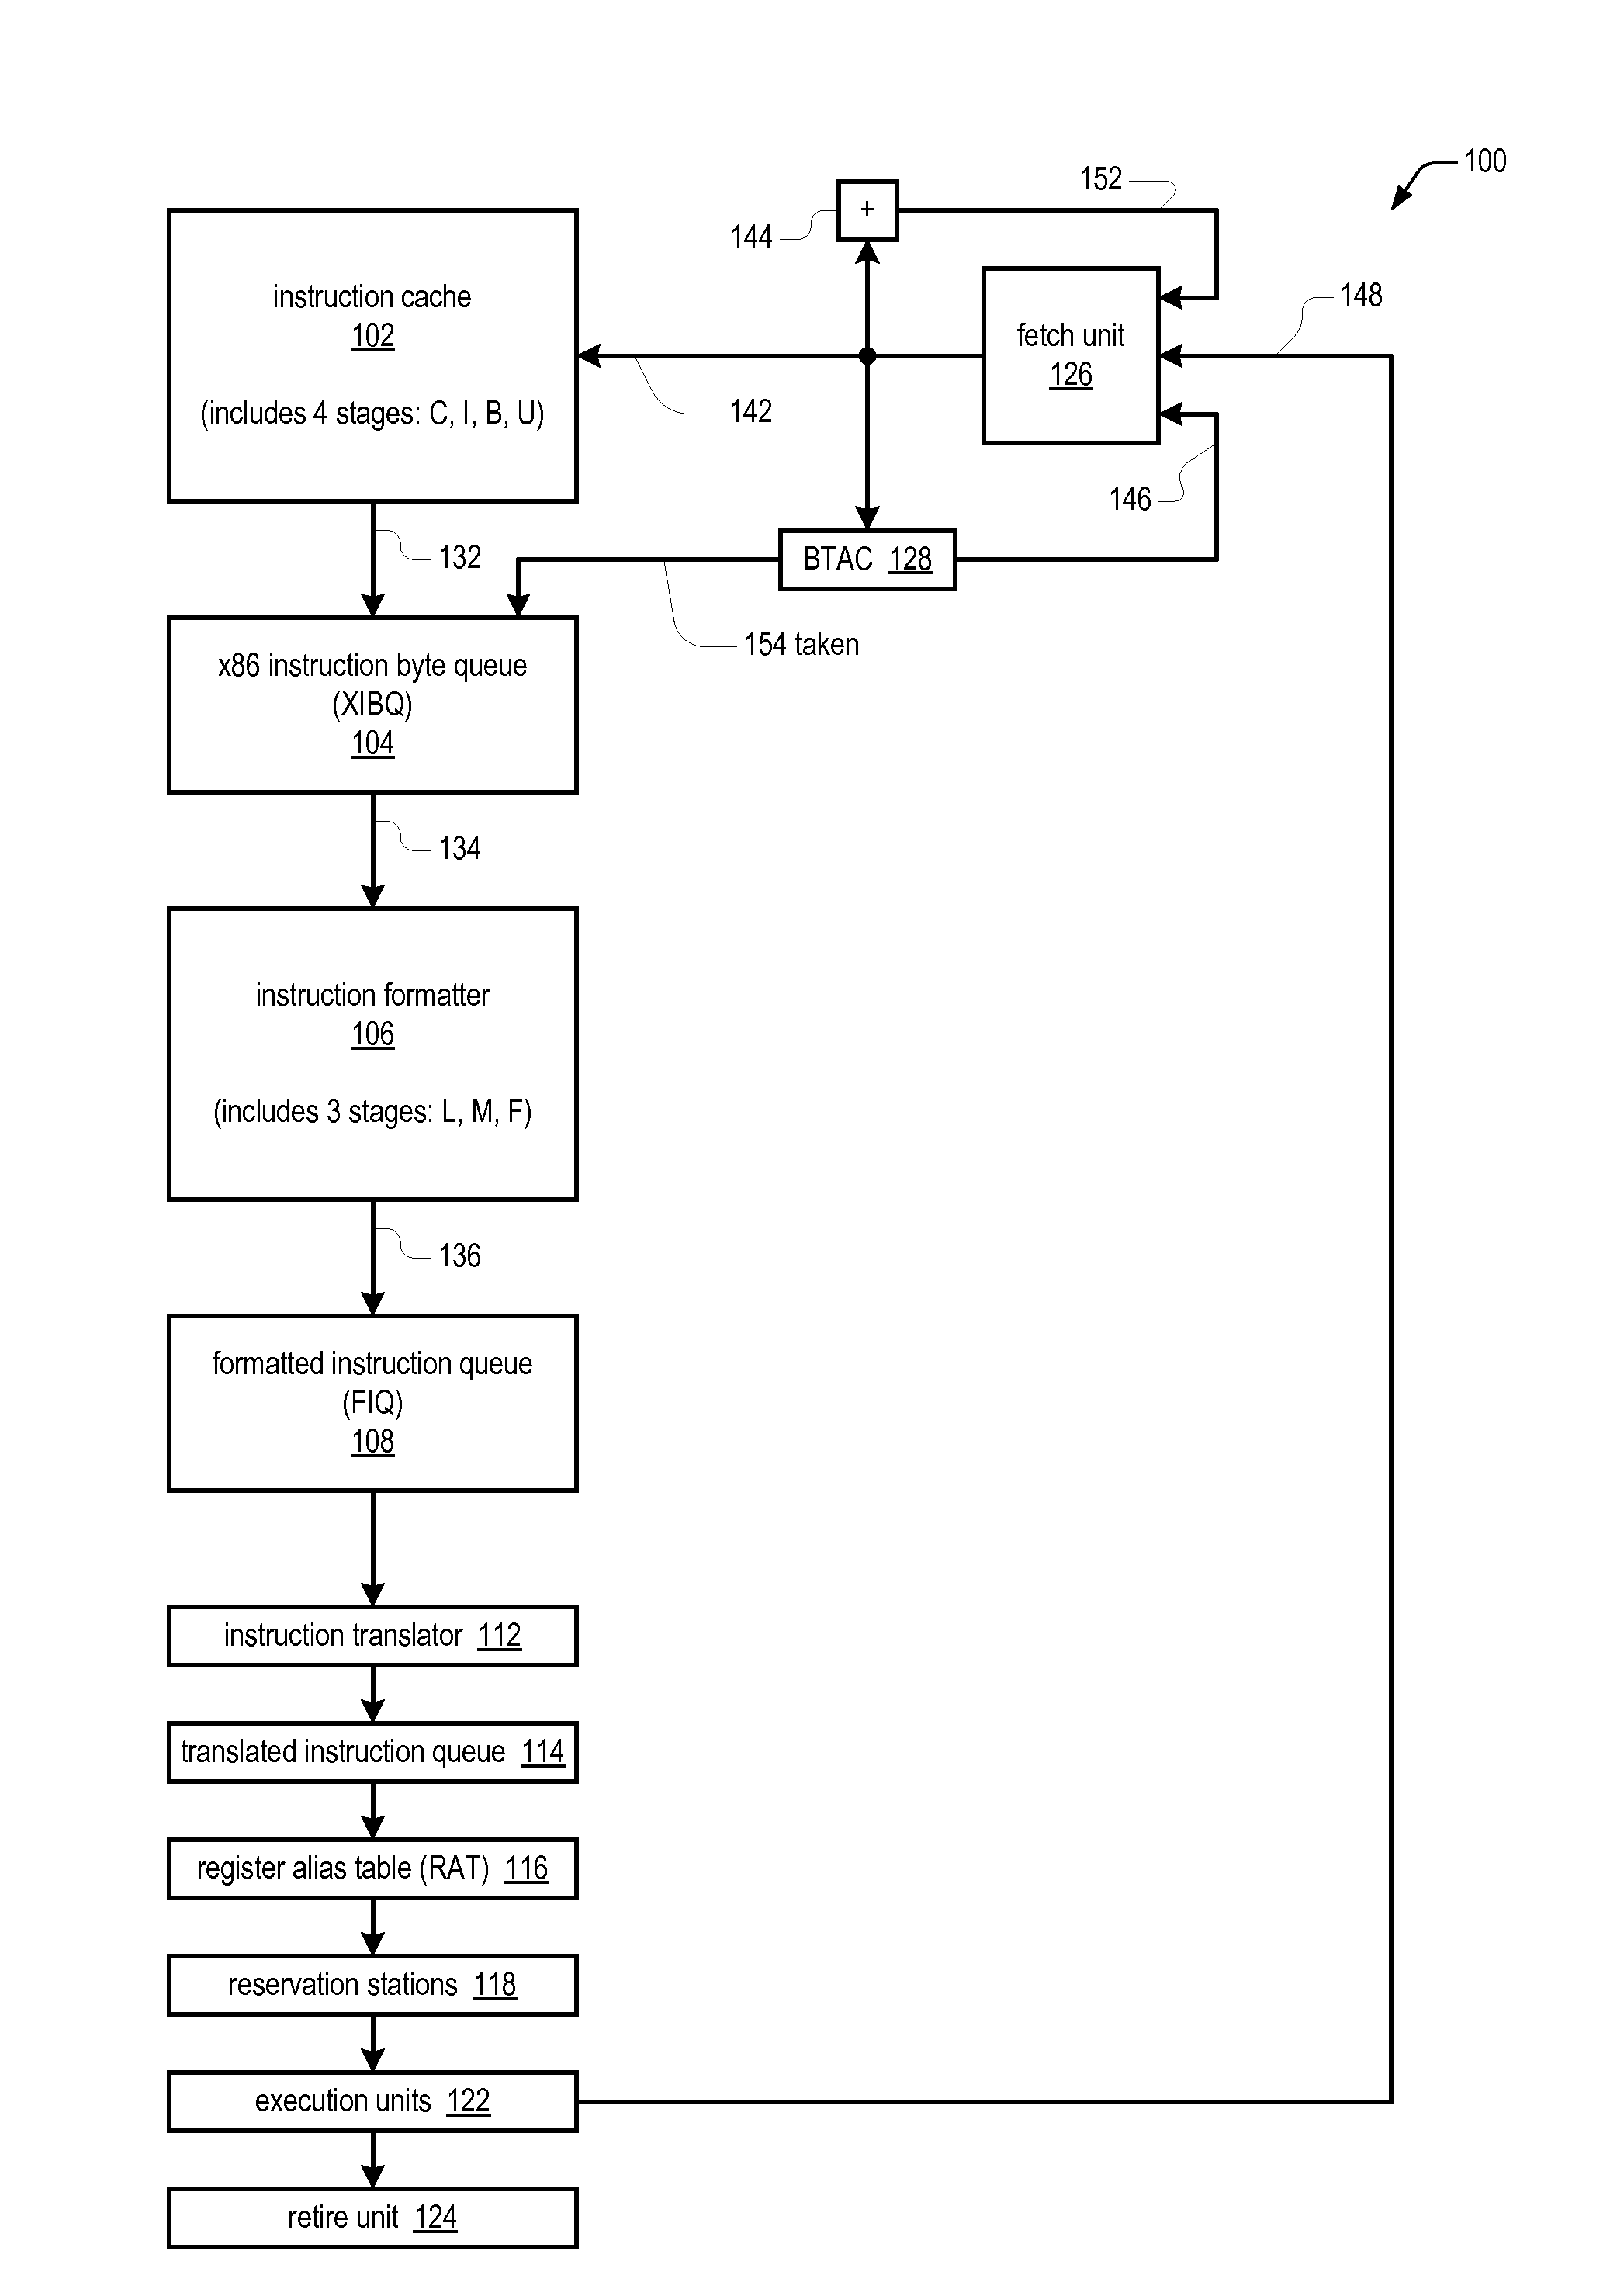 Apparatus for efficiently determining instruction length within a stream of x86 instruction bytes